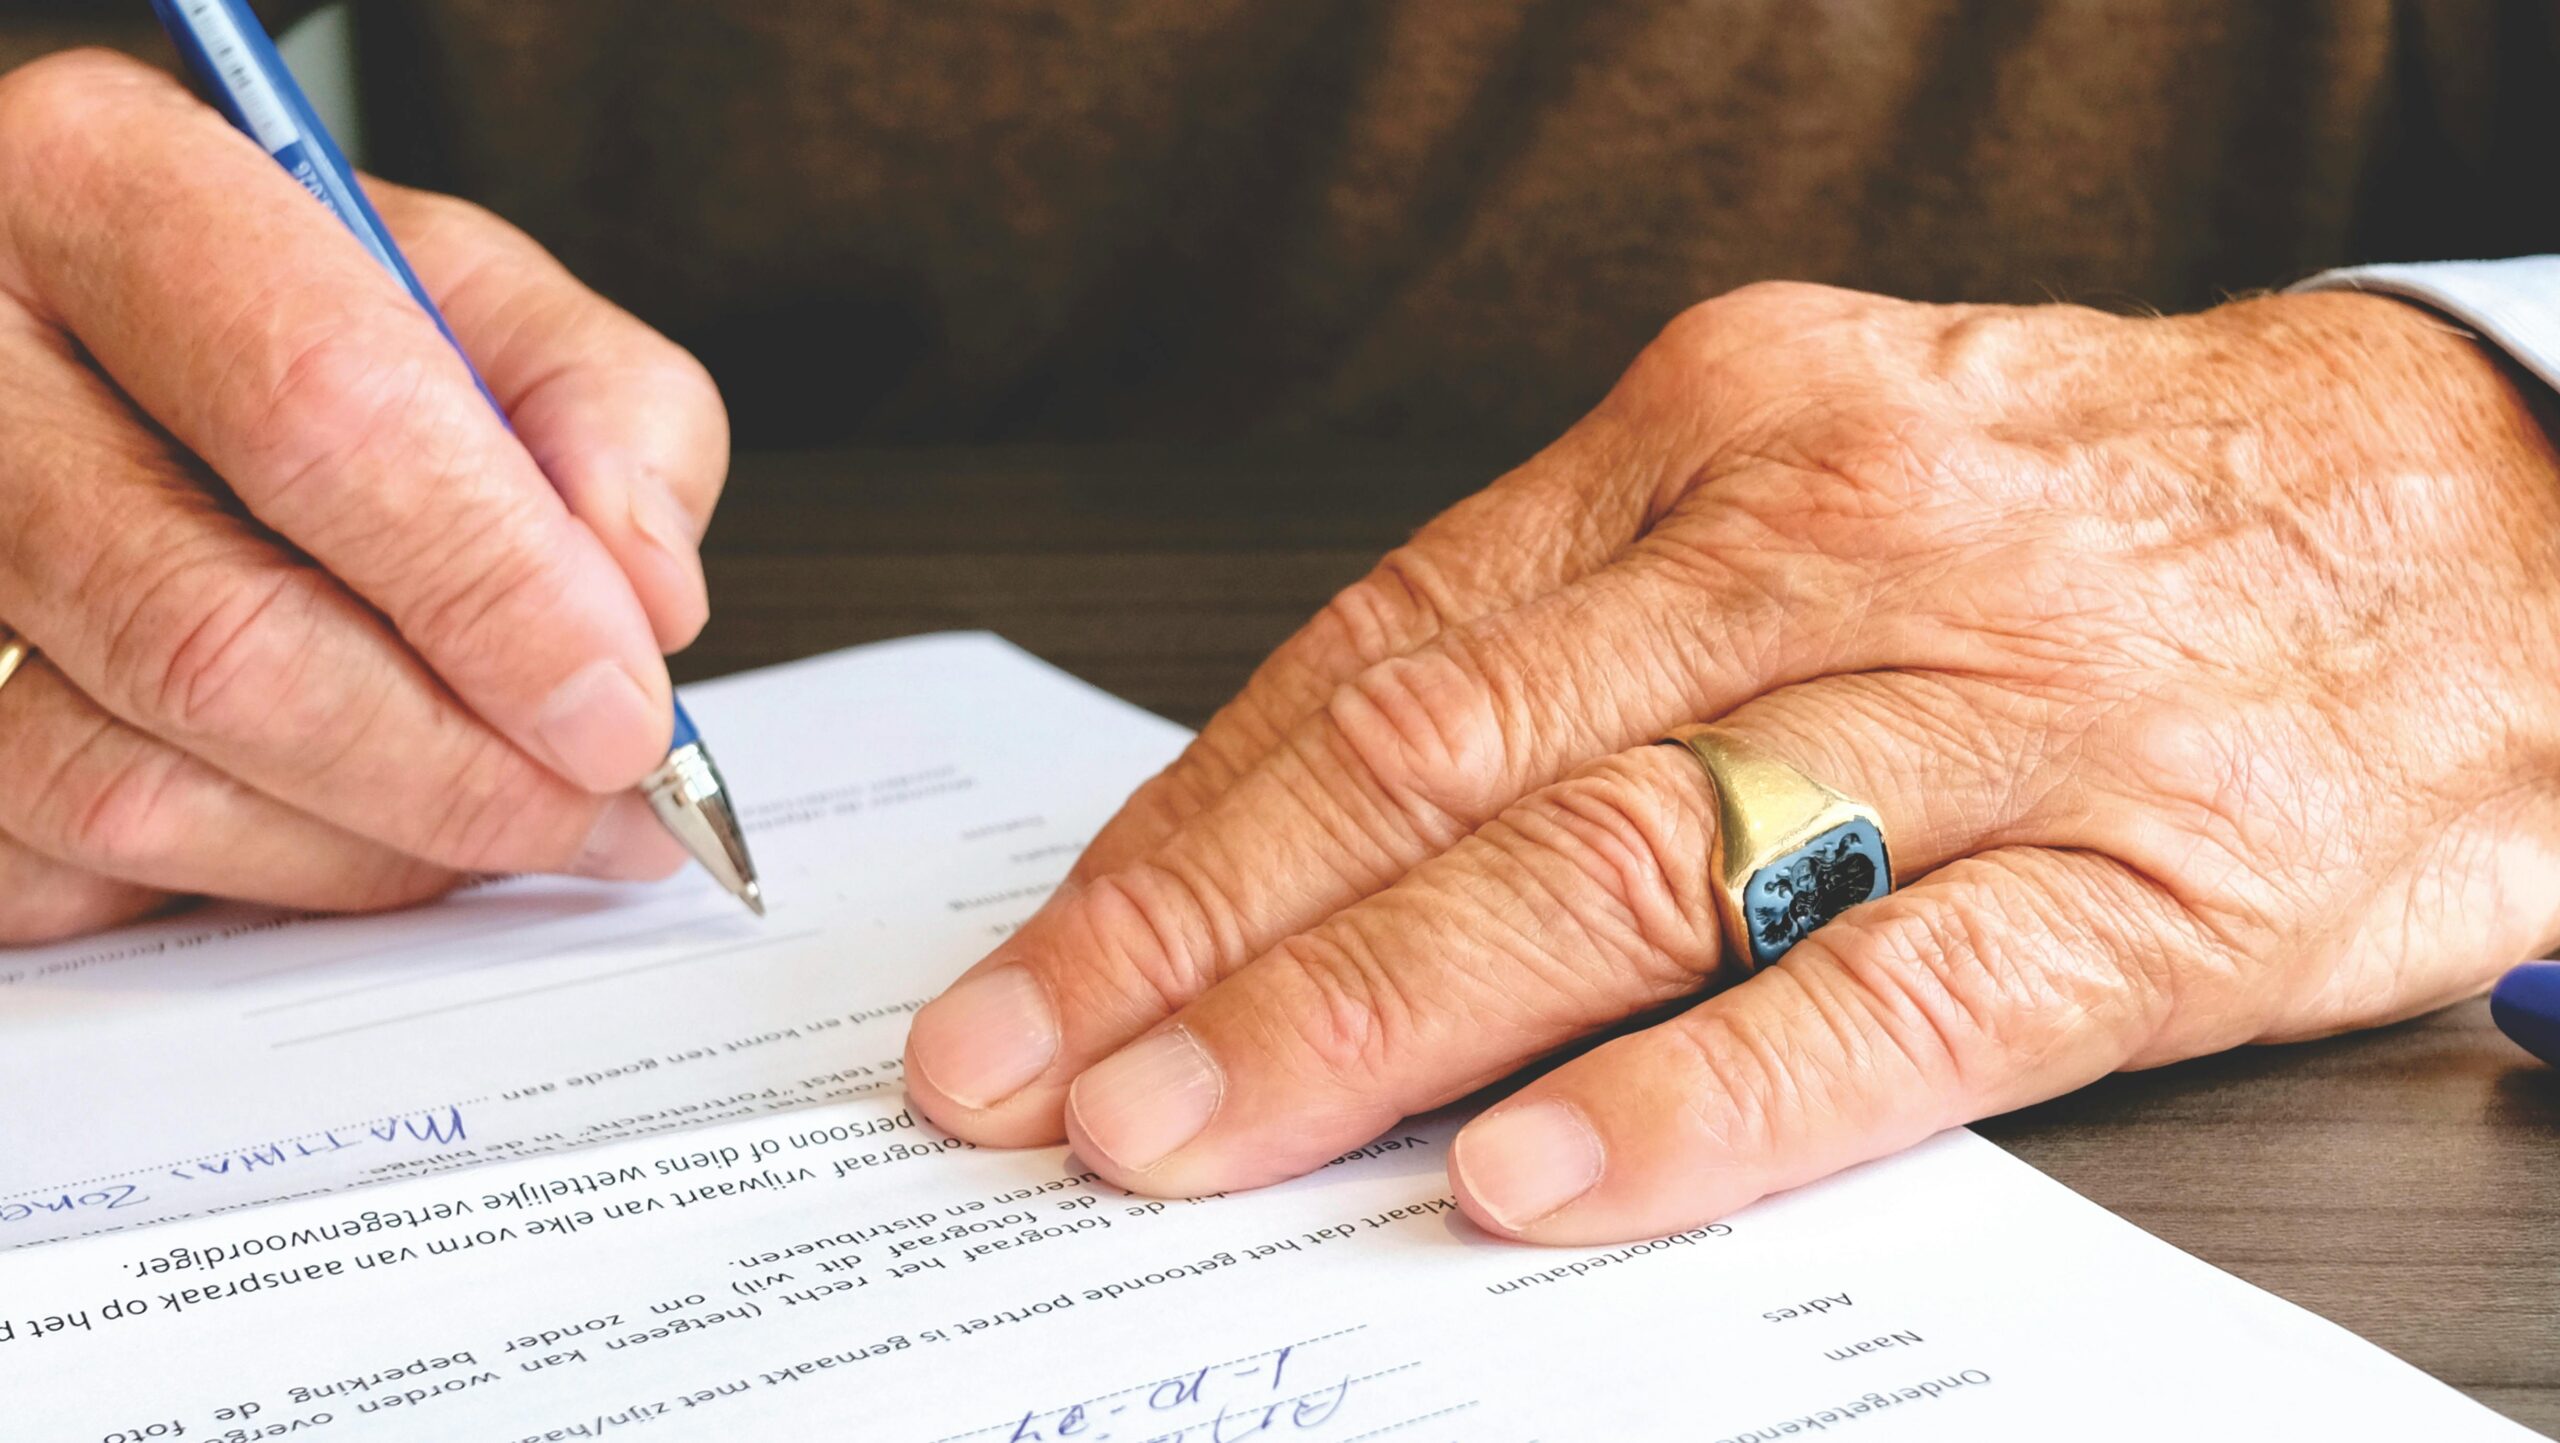 Why You Should Contact a Medicare Insurance Agent Before Signing Up